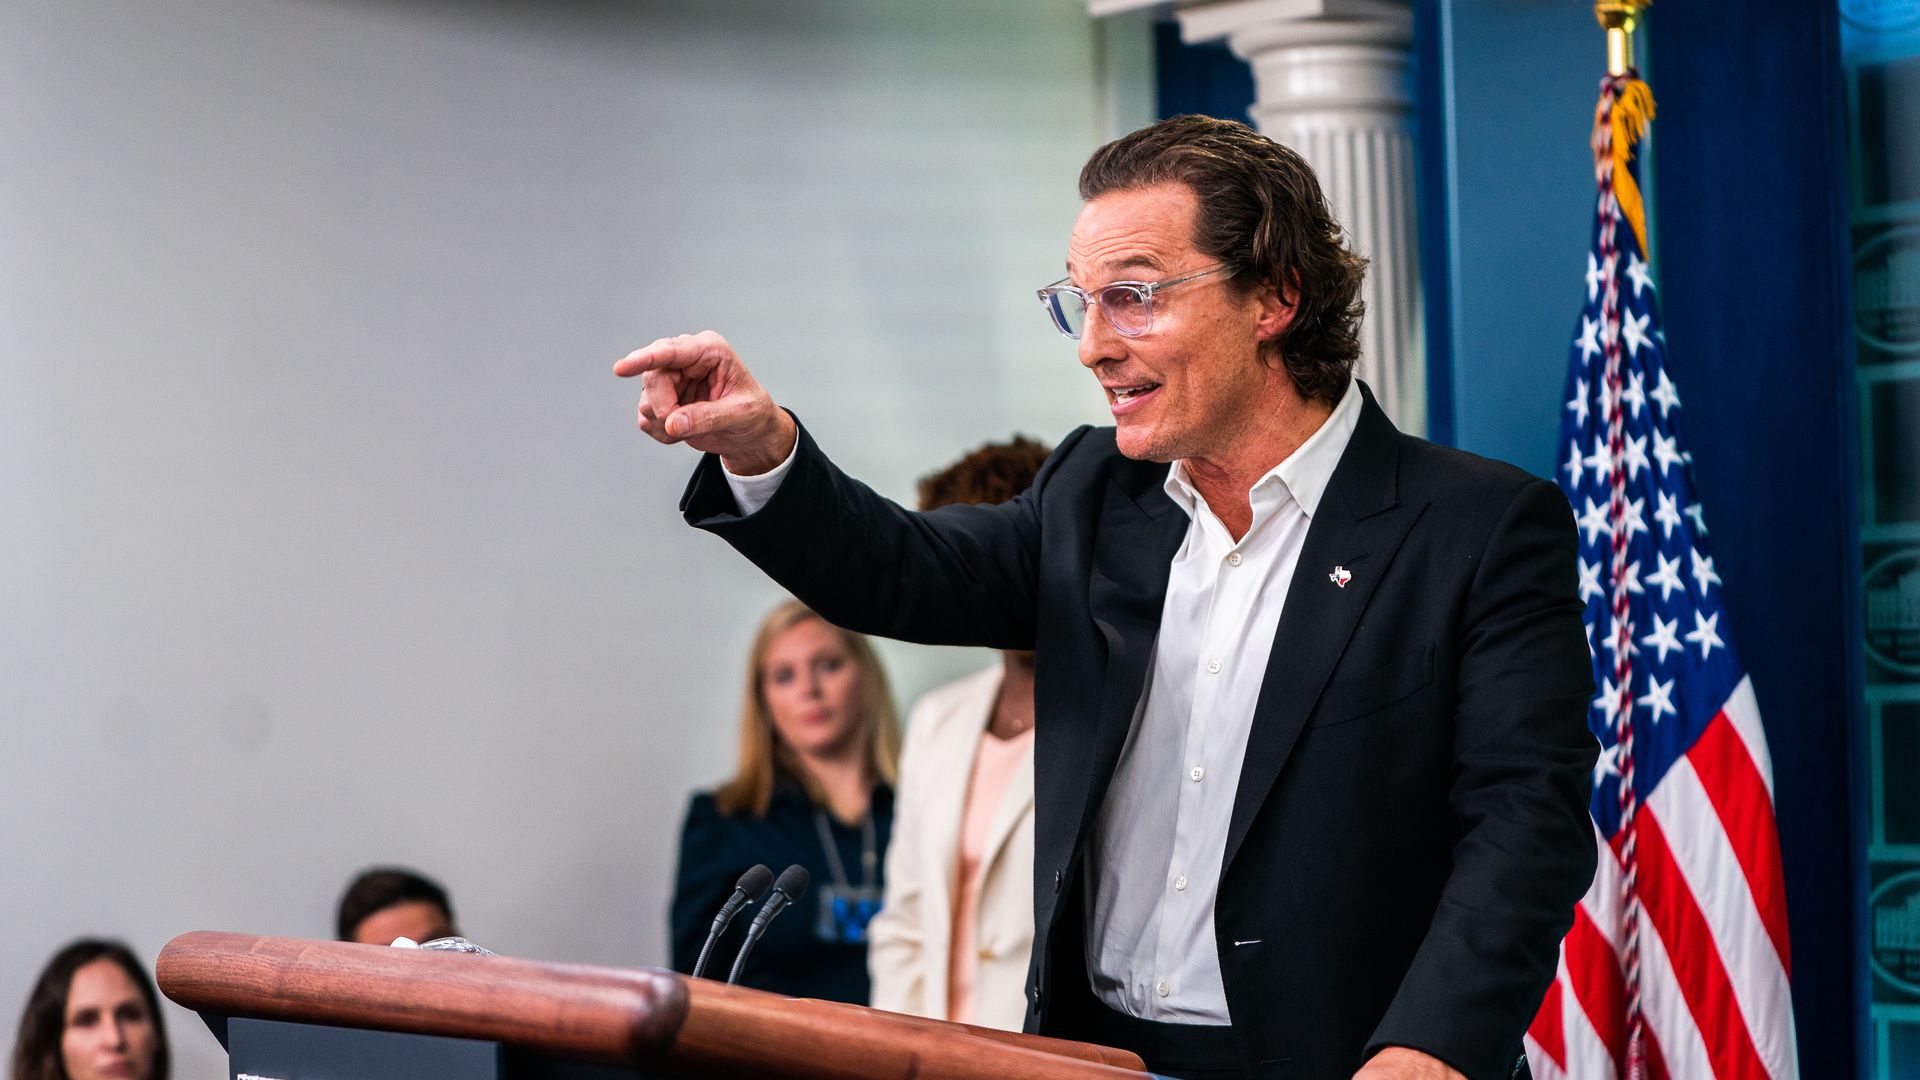 Actor Matthew McConaughey delivers remarks on the mass shooting in Uvalde as he speaks during the White House daily press briefing in the James Brady Room at the White House on June 7, 2022. Photo: Demetrius Freeman/The Washington Post via Getty Images